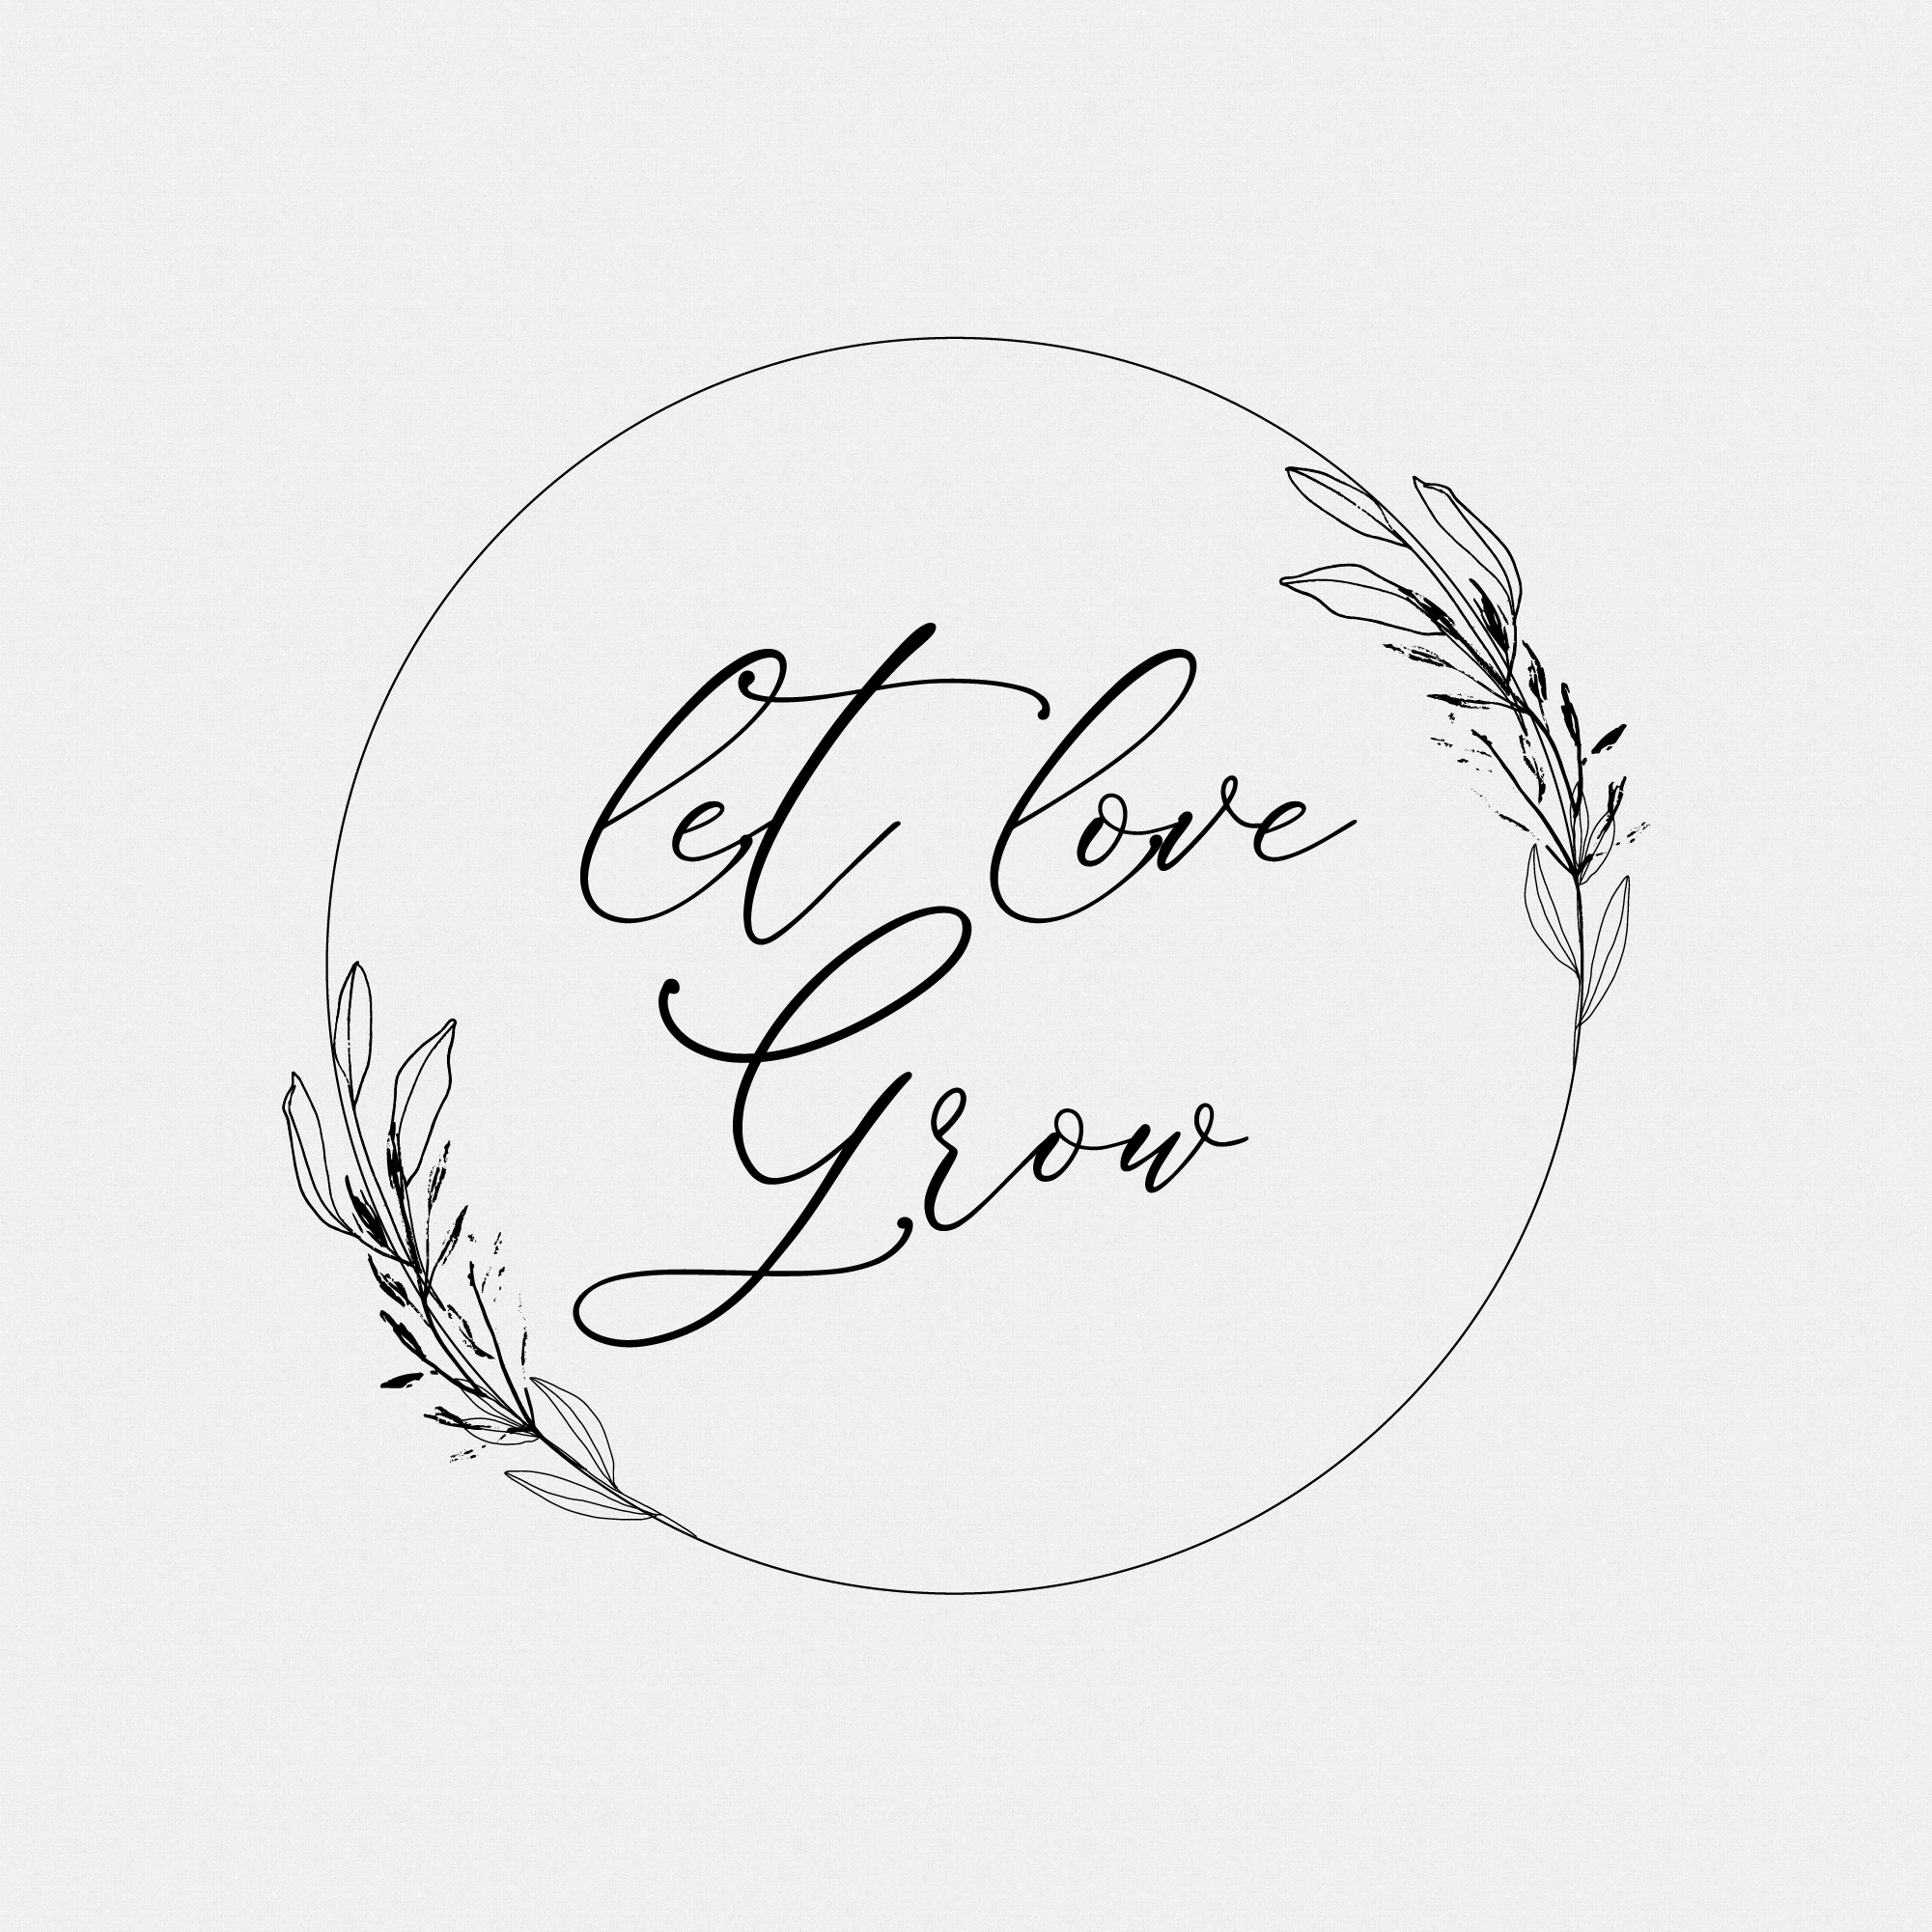 Let Love Grow Stamp, Let Love Grow, Let Love Grow Stickers, Let Love Grow Tags, Wedding Favors, Wedding Stamp, Let Love Grow Rubber Stamp, Wedding Seed Packets Let Love Grow, Let love Grow Seeds, Let Love Grow Greenery, Wedding Rubber Stamp Let Love Grow. Round, Circle, Floral, Rubber Stamp - Style #w6